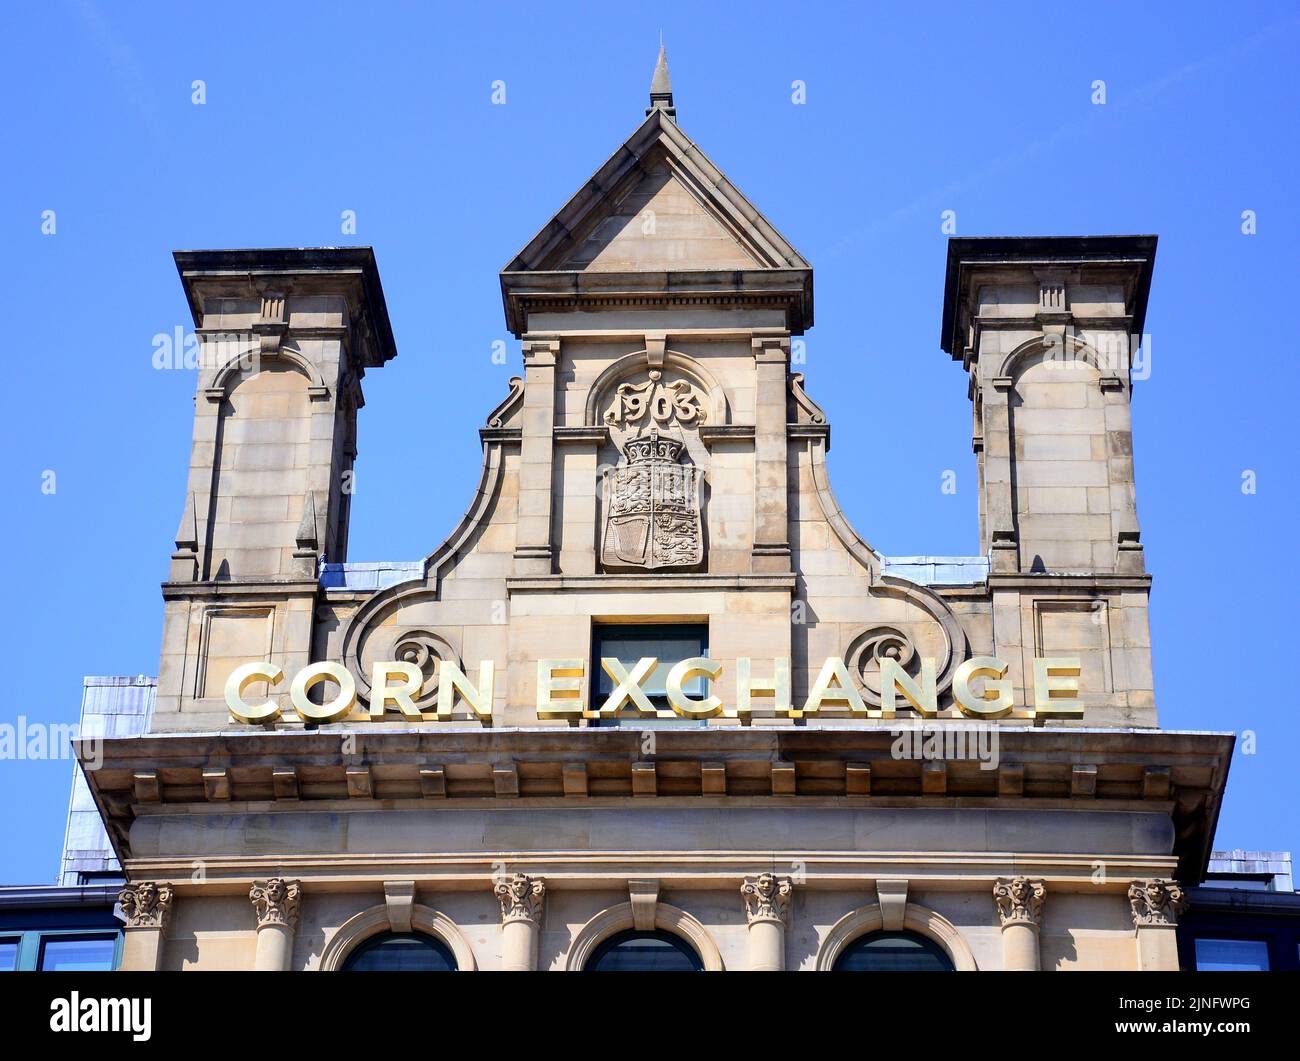 An exterior sign or signage or logo on the Corn Exchange, a grade II listed building, in central Manchester, United Kingdom, British Isles. Stock Photo